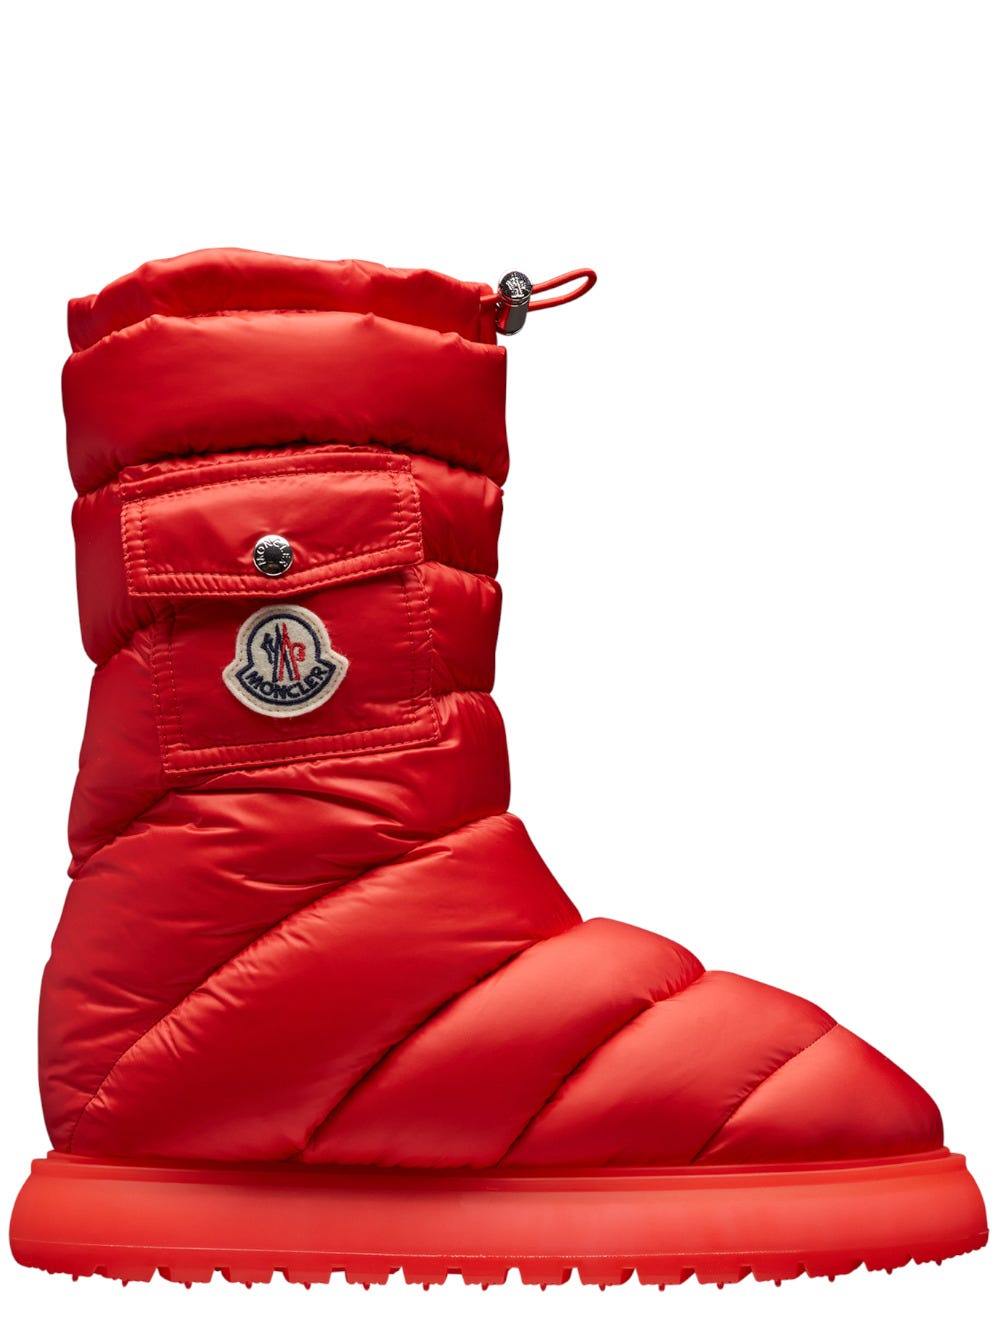 MONCLER GAIA POCKET RED SNOW BOOTS